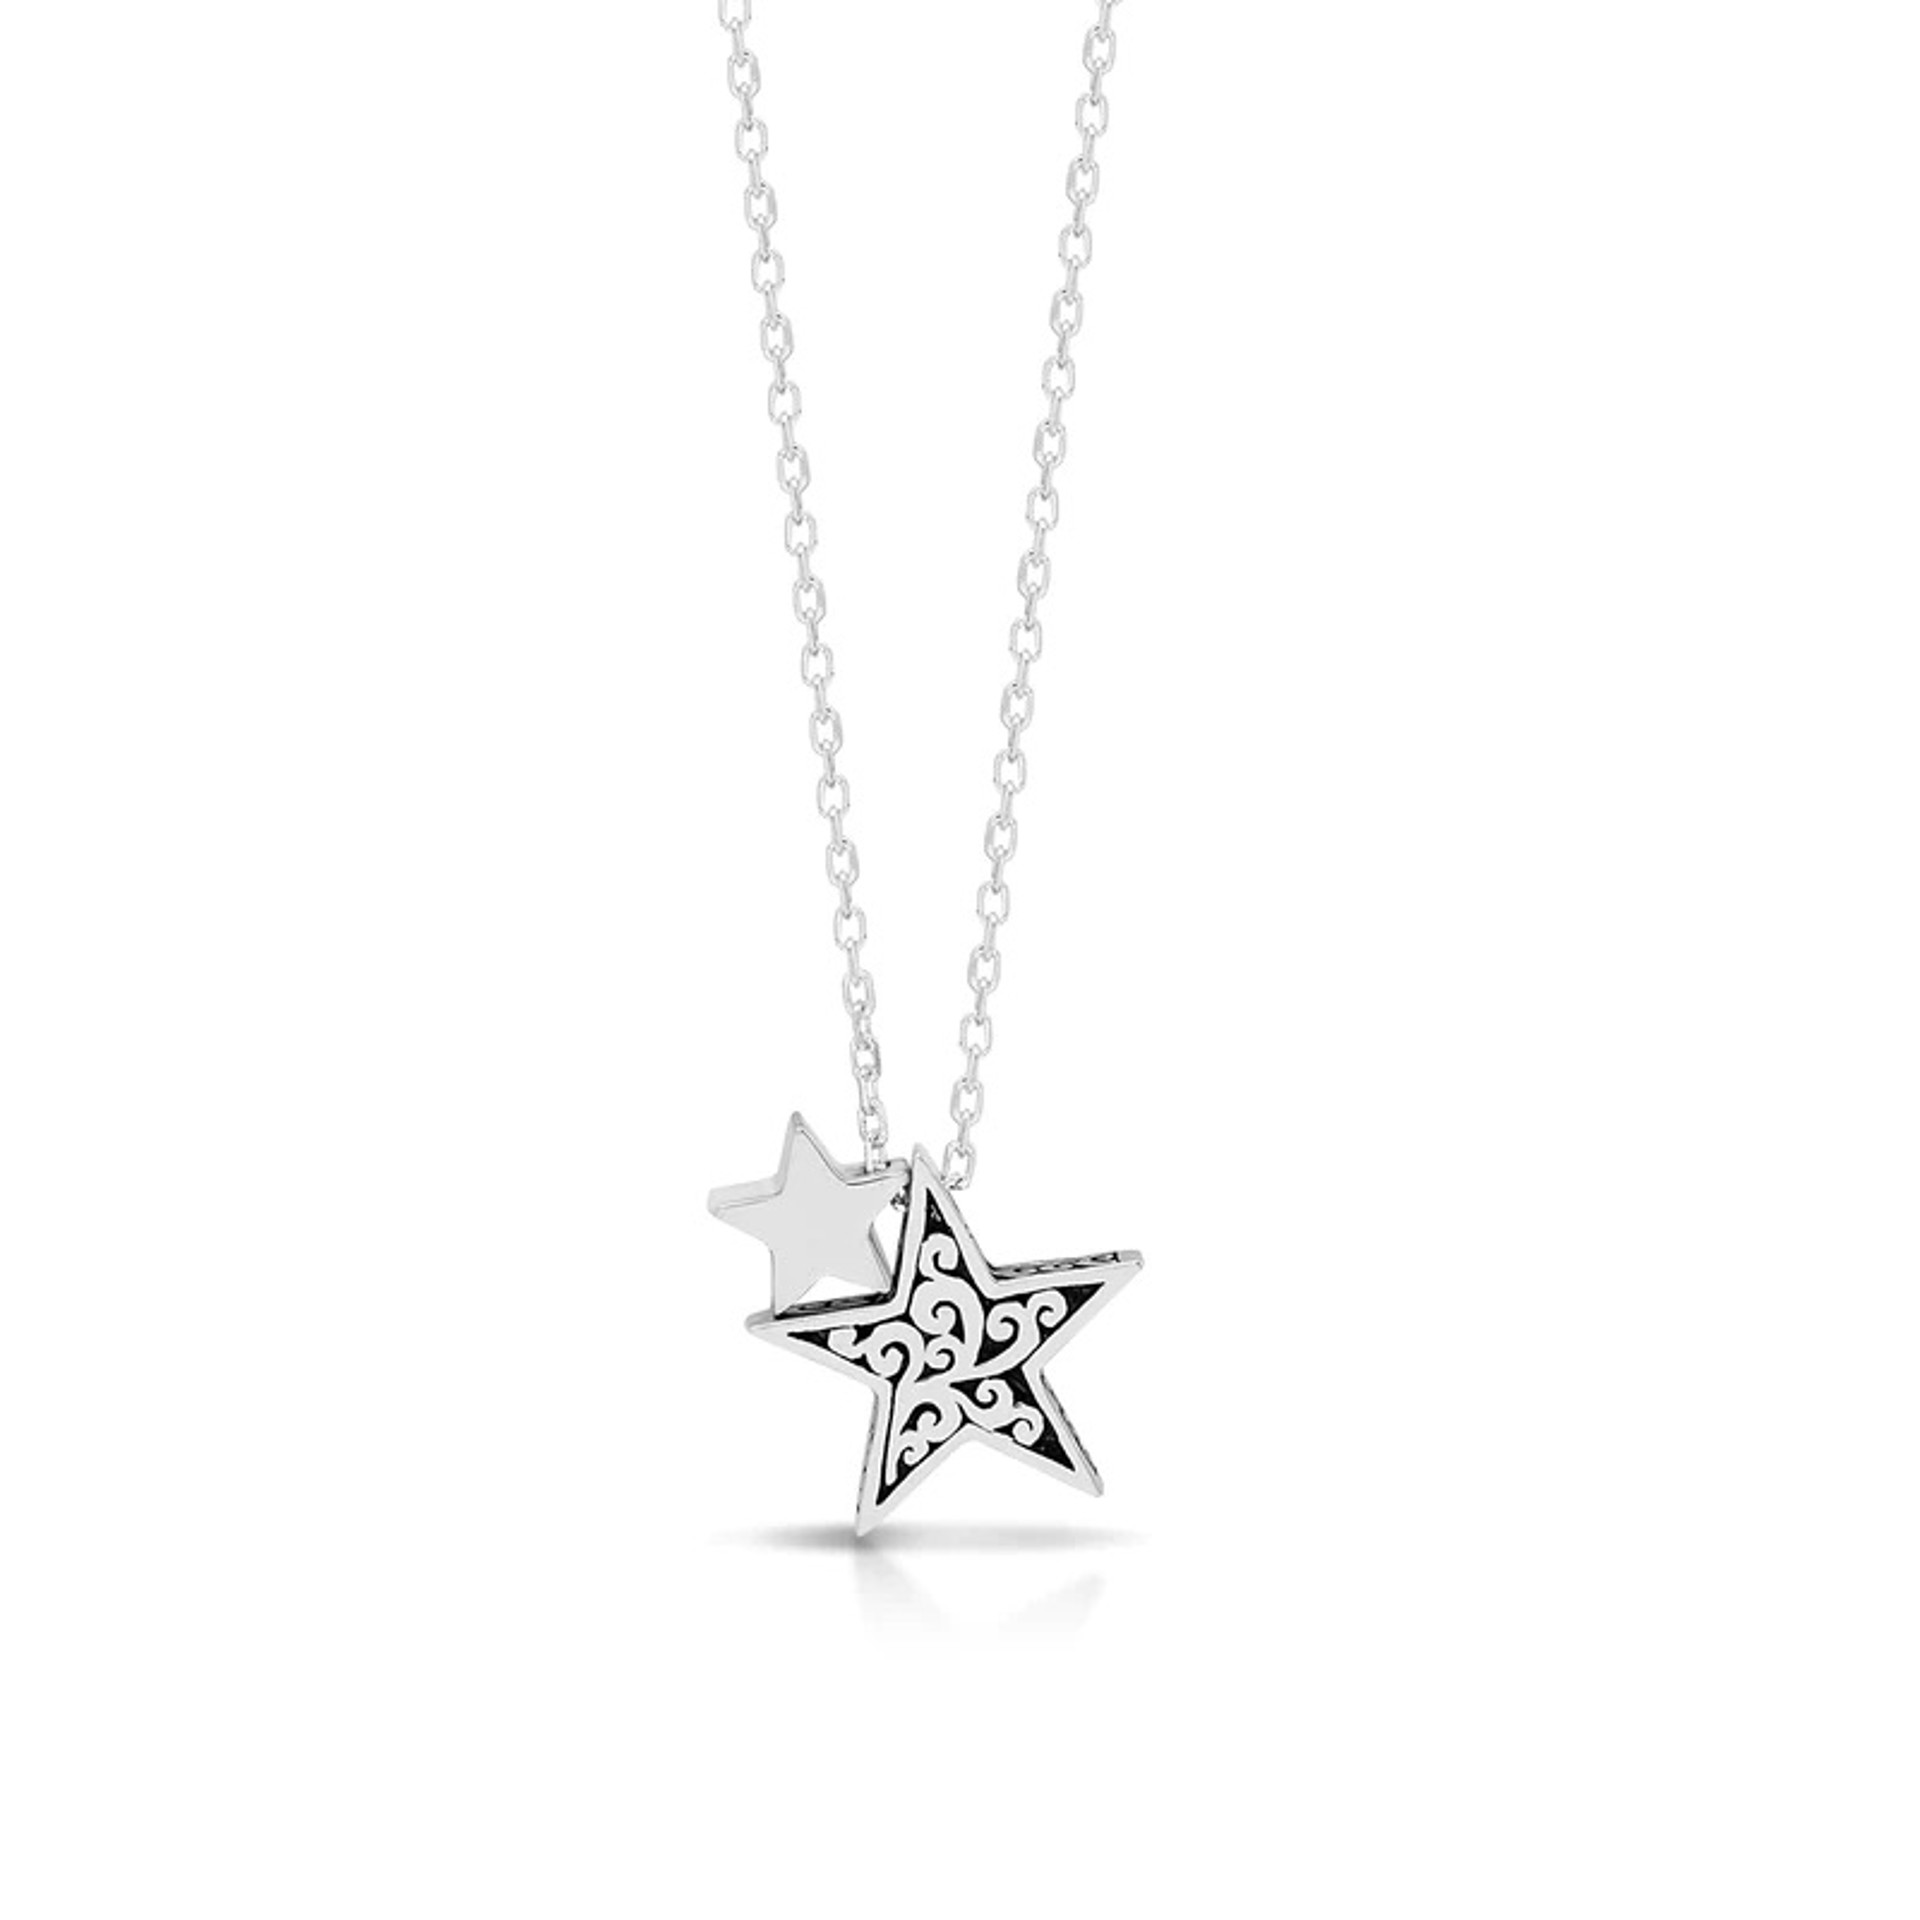 1093 LH Signature Scroll Sterling Silver Delicate Double Stars Pendant Necklace in 18" Adjustable Chain. Pendant size 13mm (SO) by Lois Hill